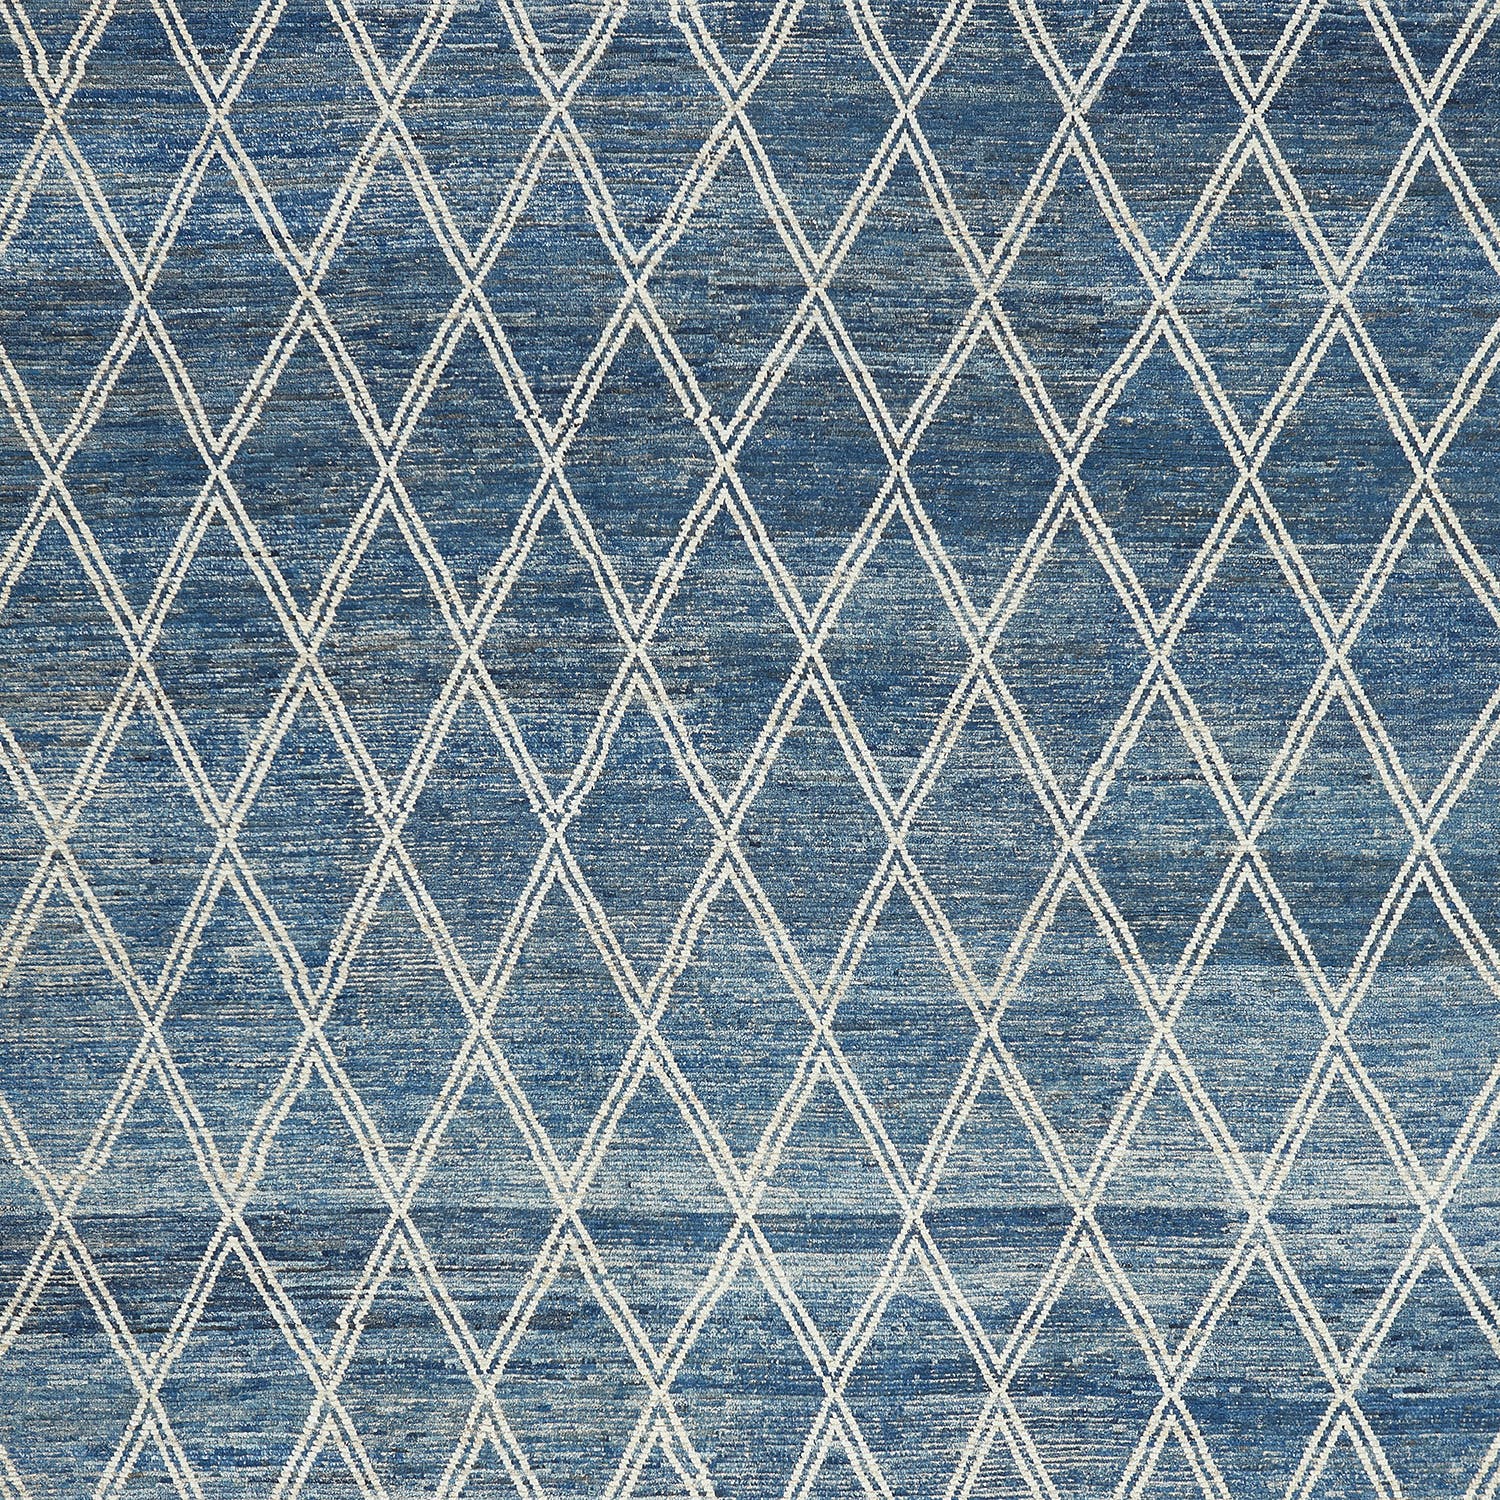 Textured denim fabric with white diamond pattern, perfect for decor.